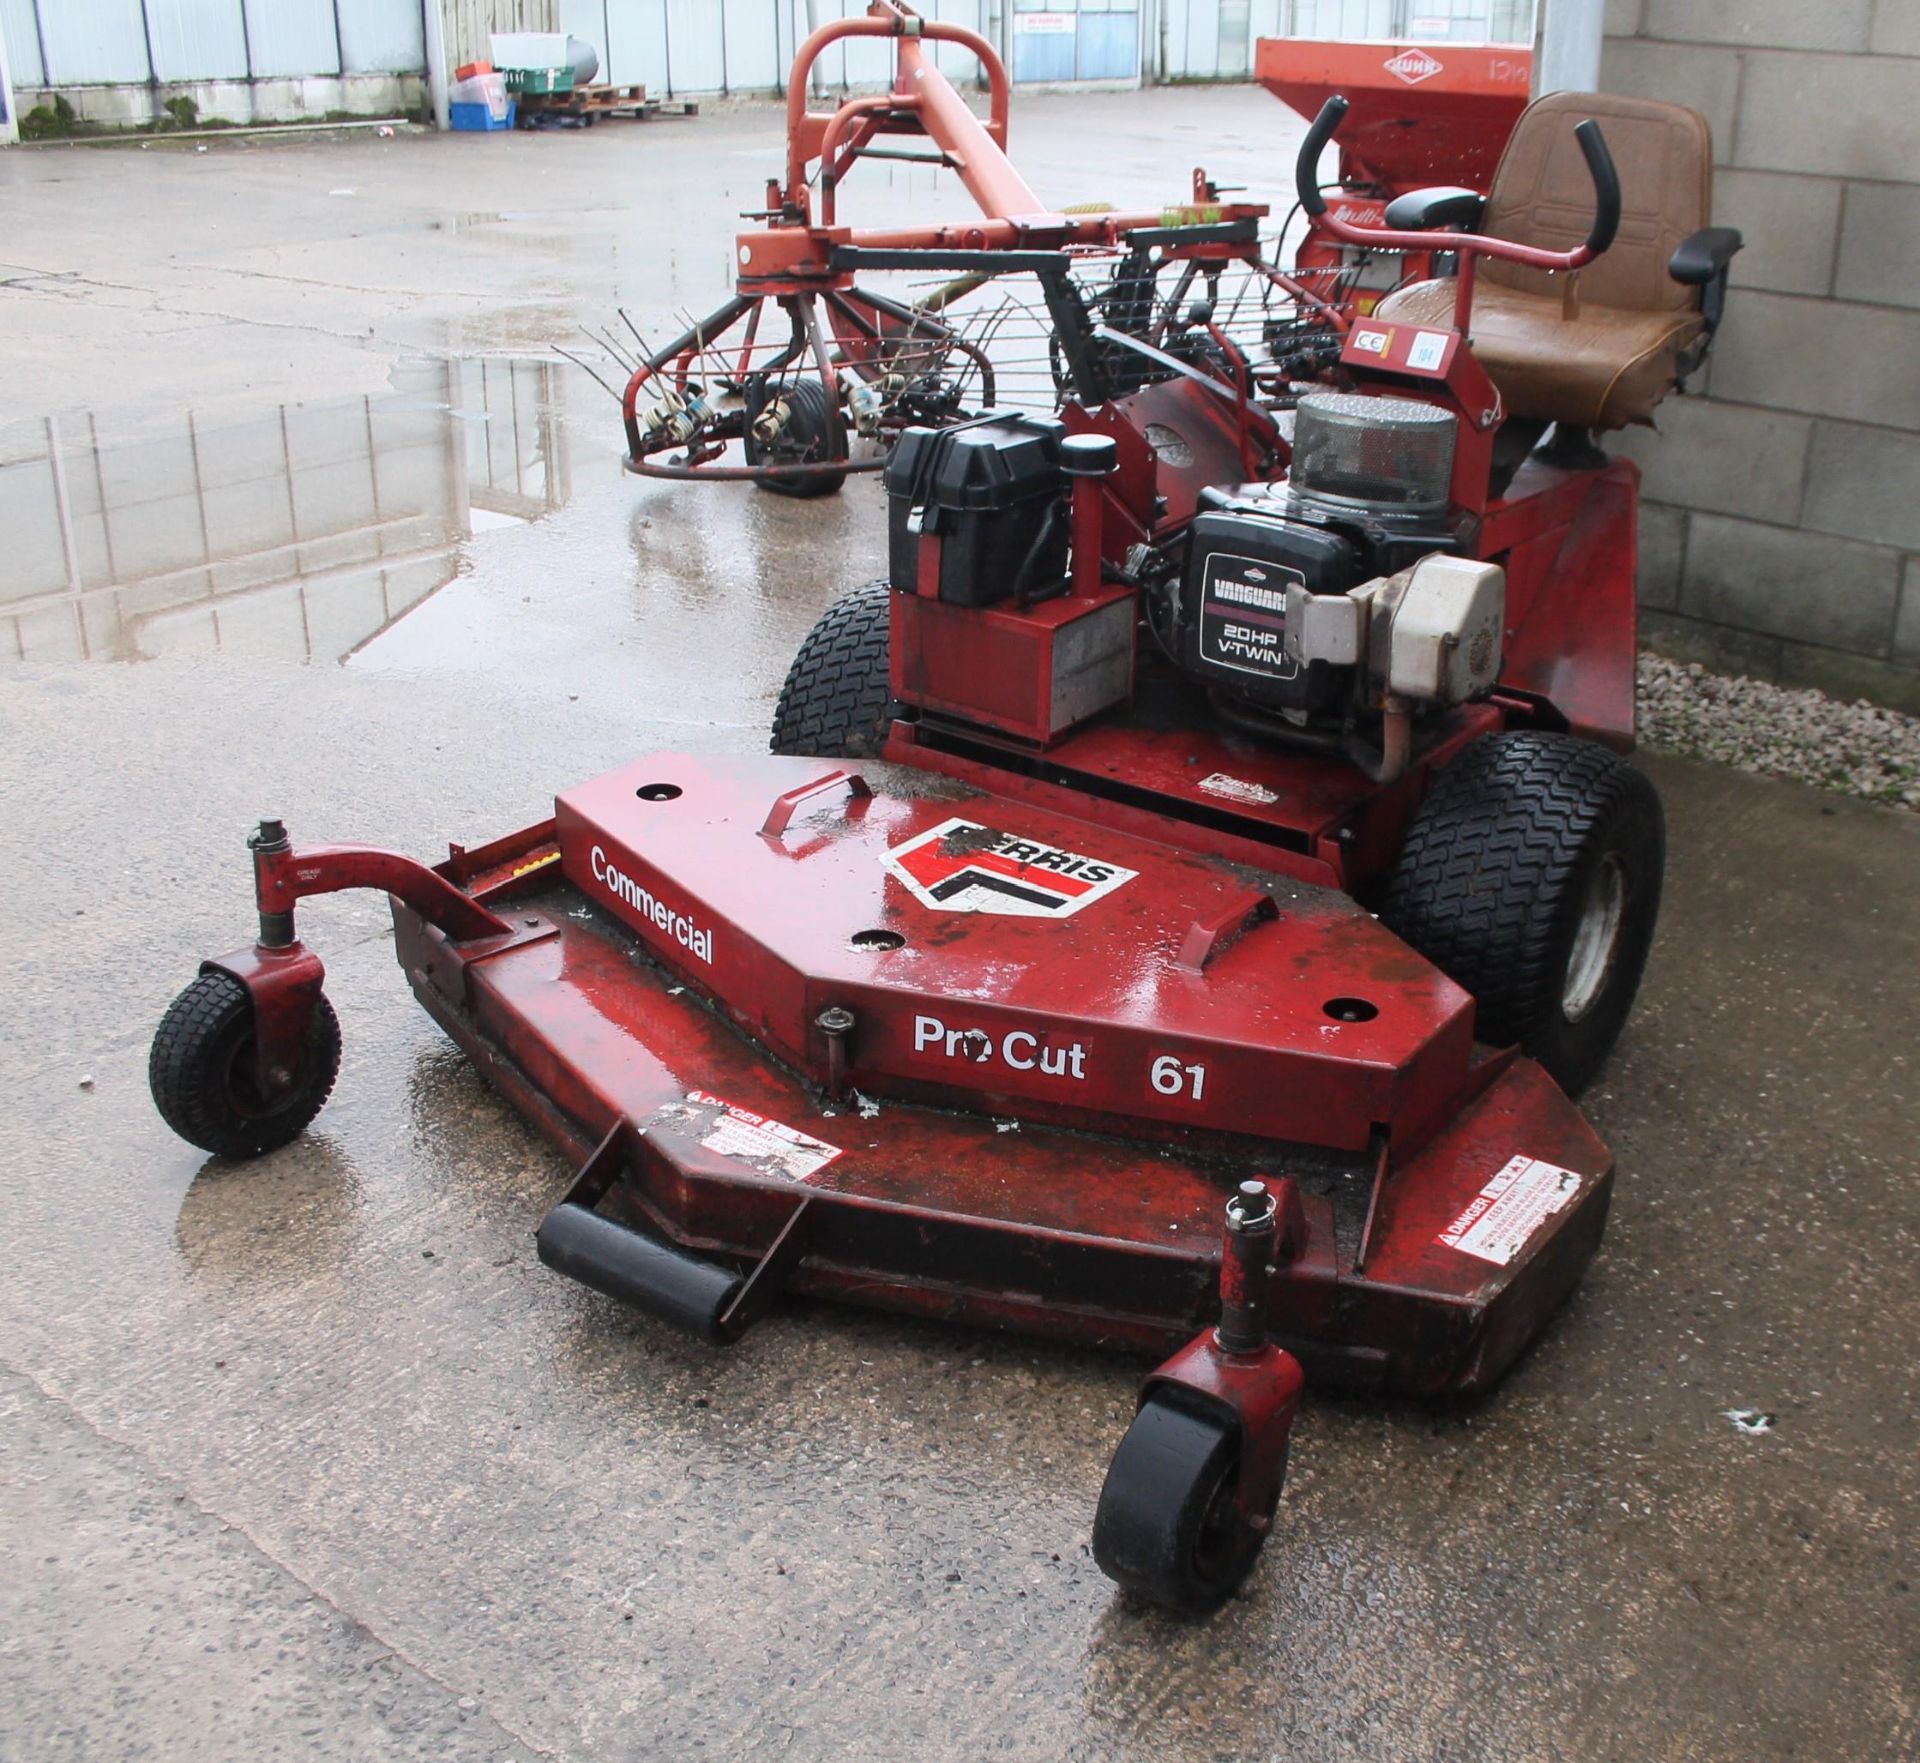 A FERRIS COMMERCIAL PRO-CUT 61 LAWN MOWER WITH A VANGUARD 20HP V-TWIN ENGINE NO VAT - Image 2 of 3